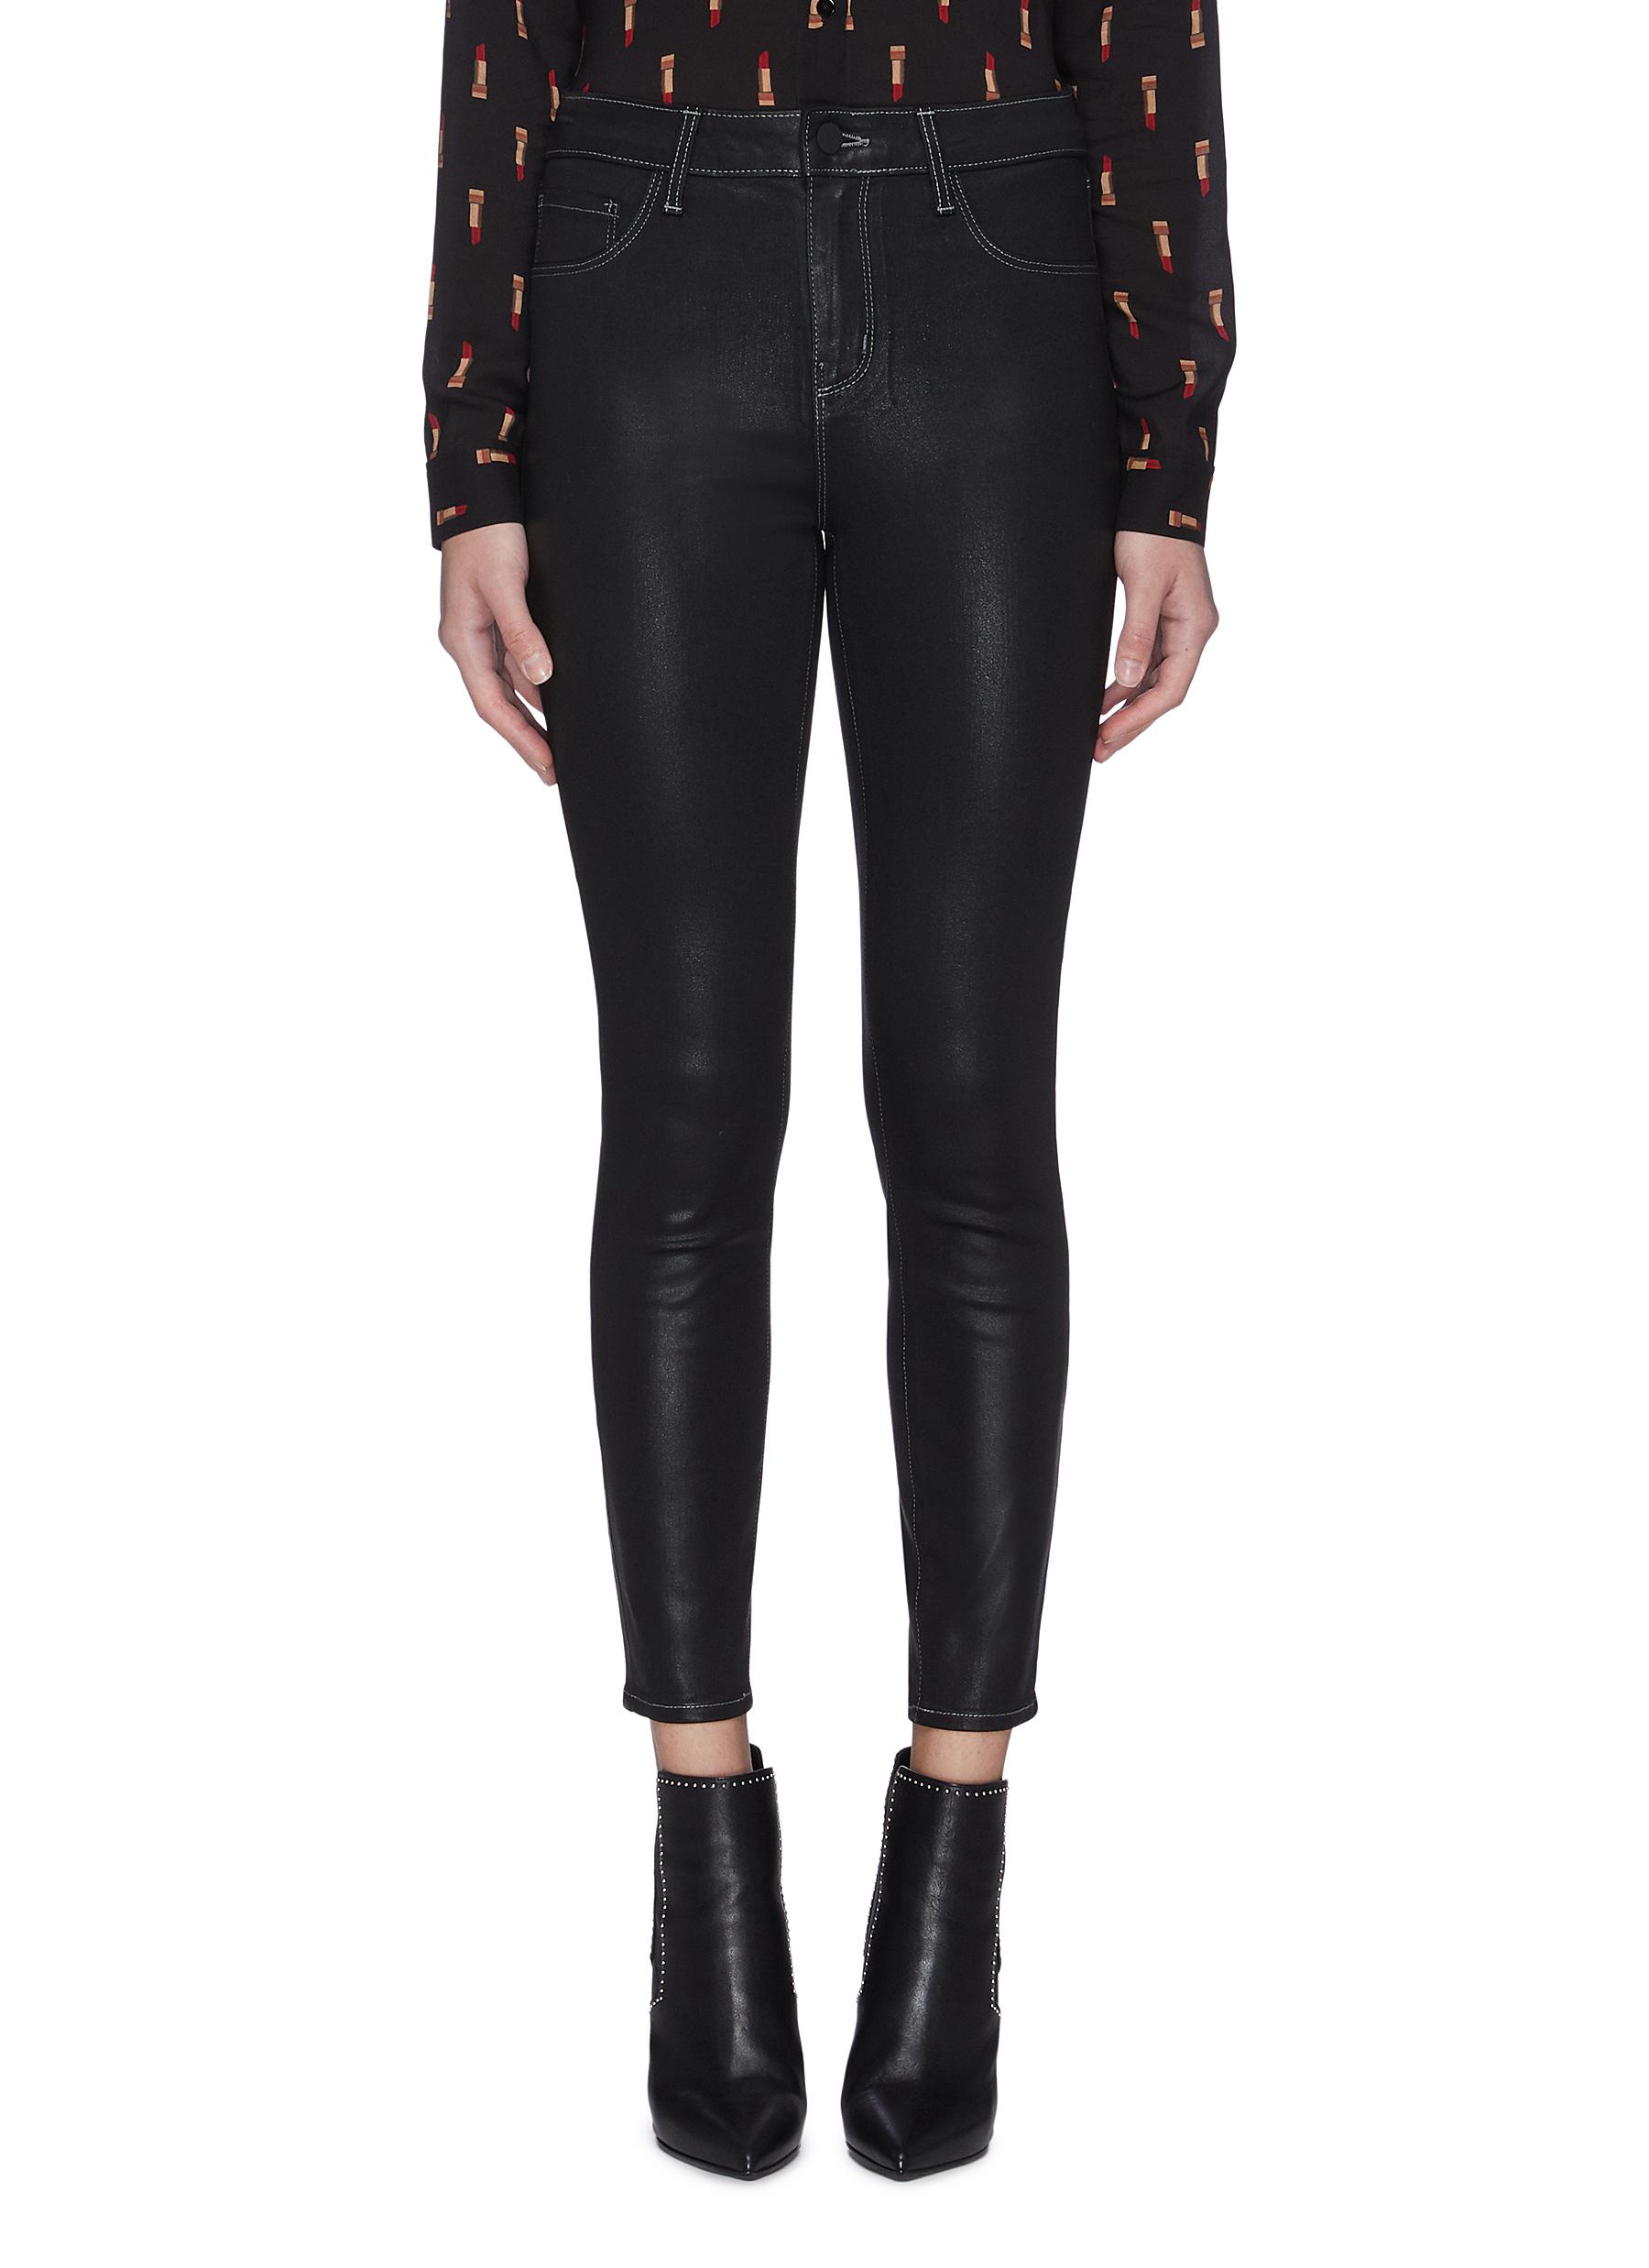 L AGENCE 'MARGOT' COATED CROP SKINNY JEANS